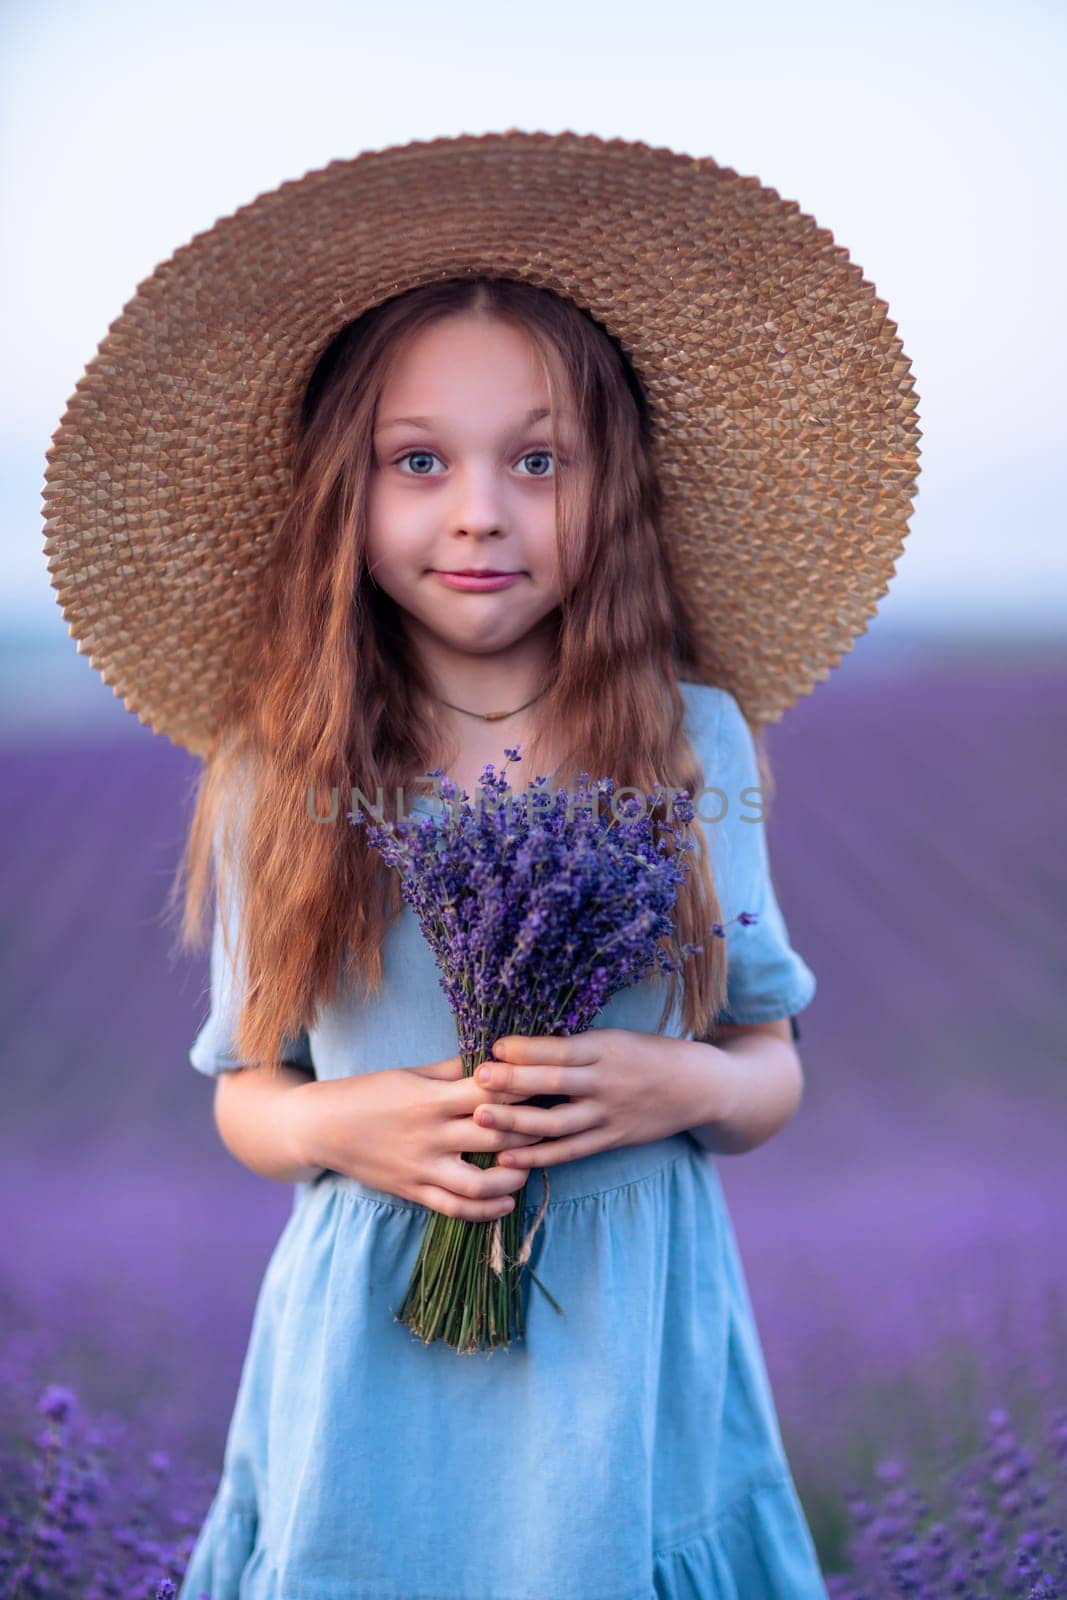 Girl lavender field in a blue dress with flowing hair in a hat stands in a lilac lavender field.